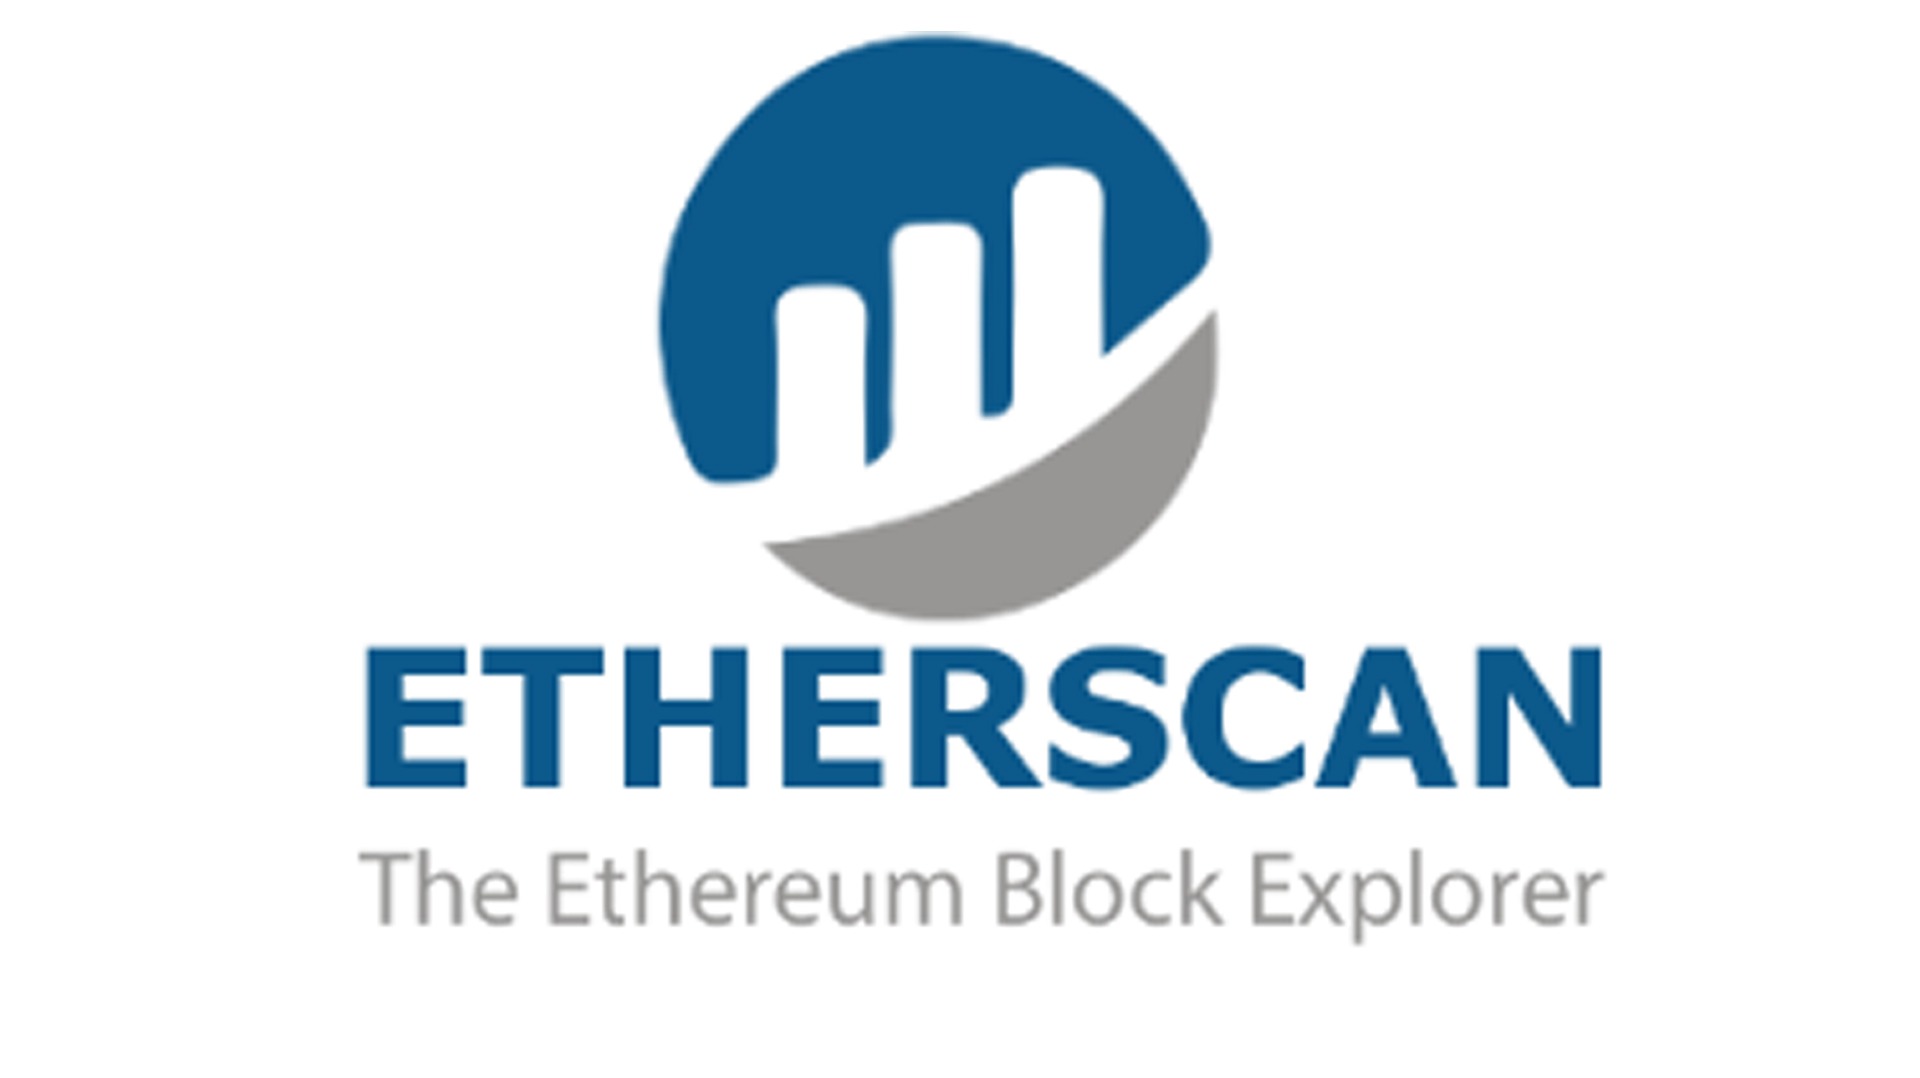 What Is Etherscan, and What Are Block Explorers?